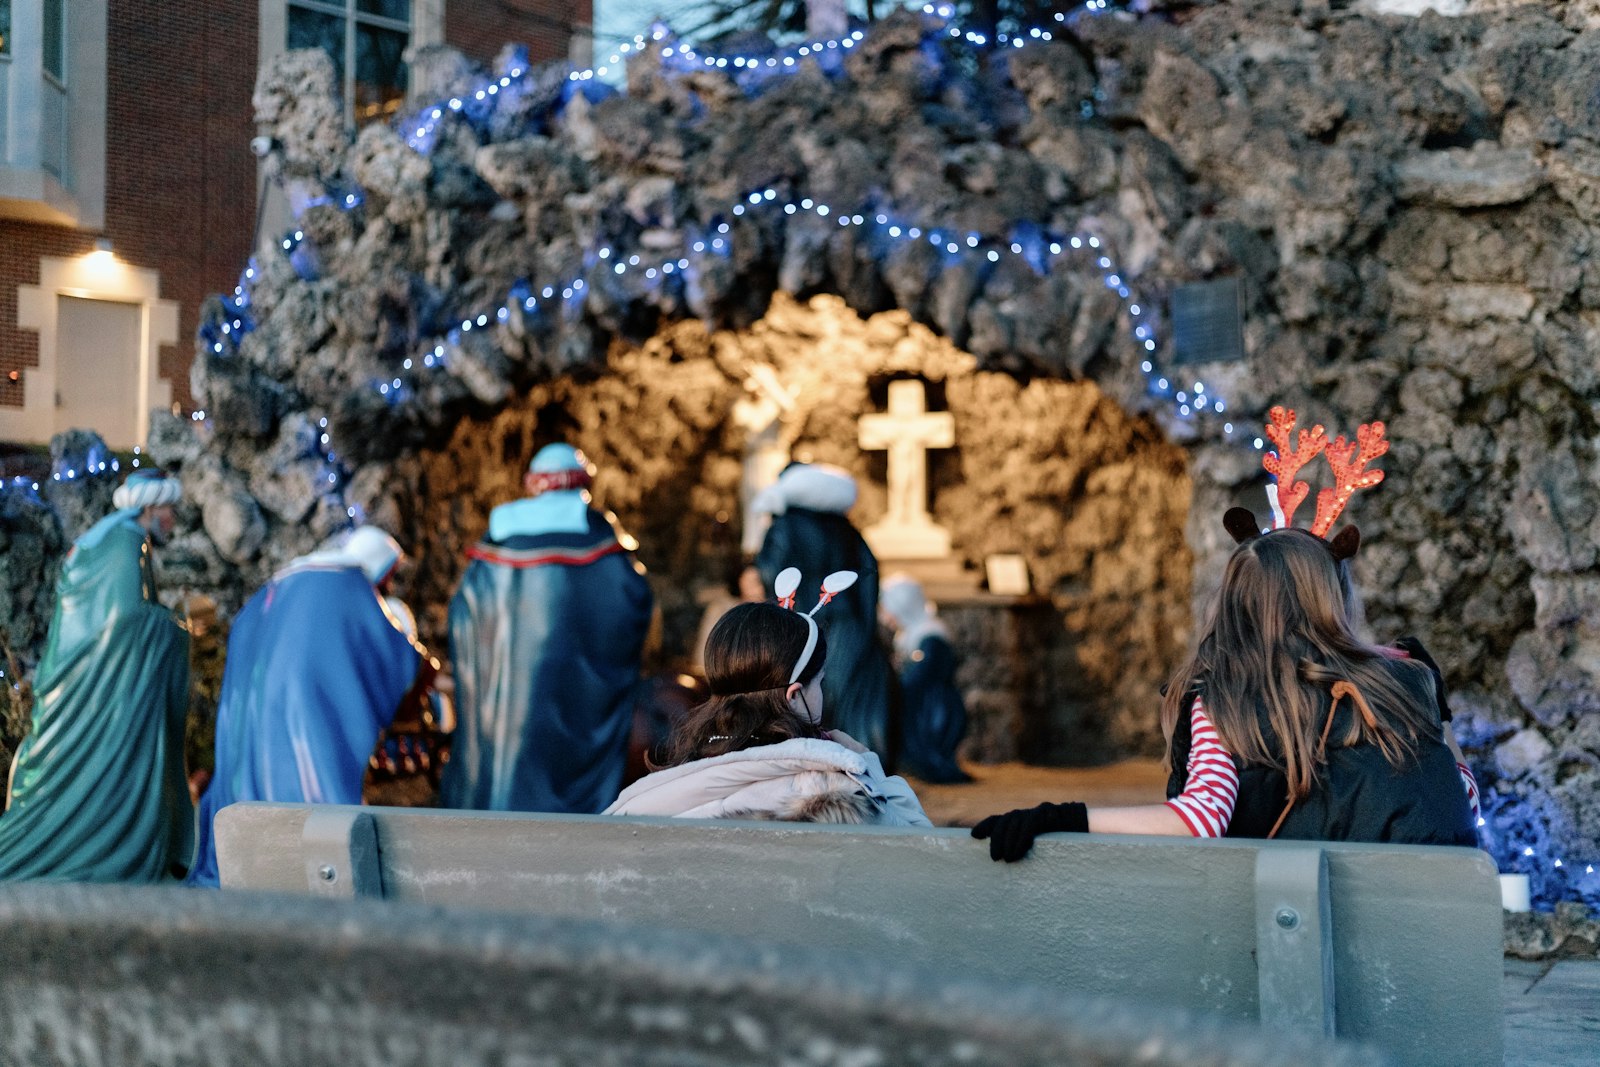 Two girls pray before a life-sized Nativity on display at the campus' Marian grotto. (Alissa Tuttle | Special to Detroit Catholic)